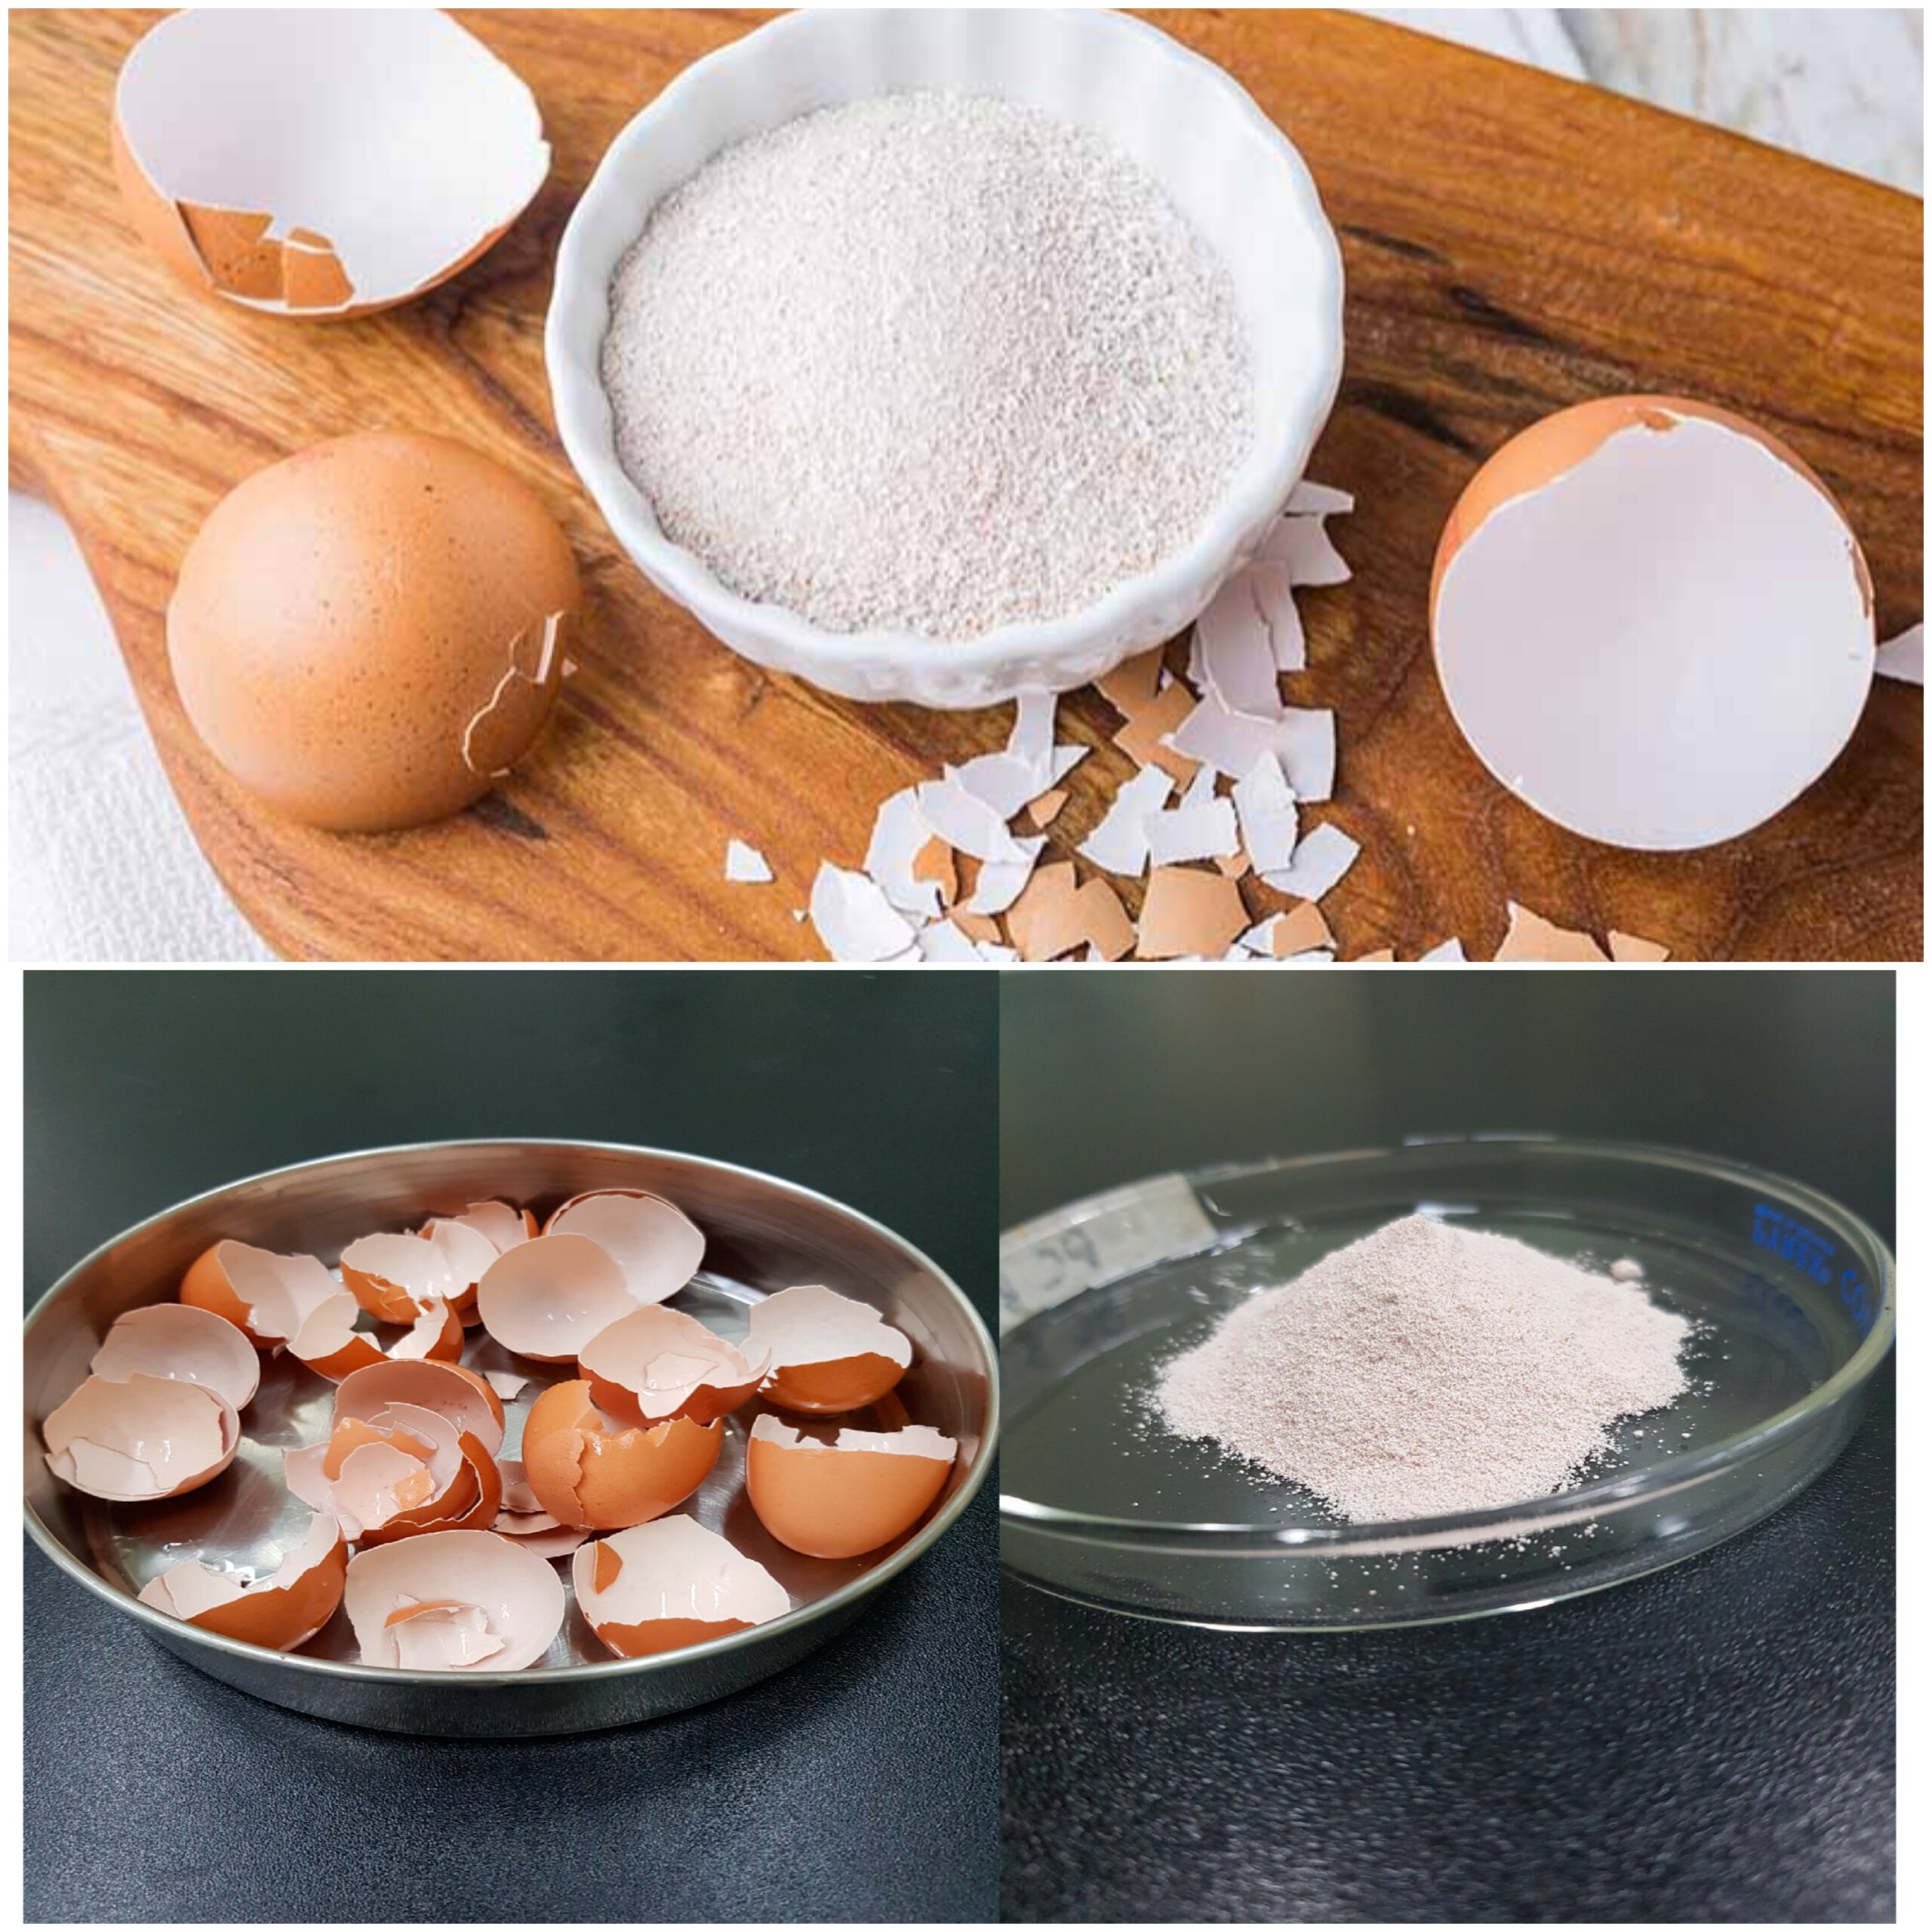 The Tiny Spoonful with Mighty Benefits: Eggshell Powder for Your Bones and Teeth